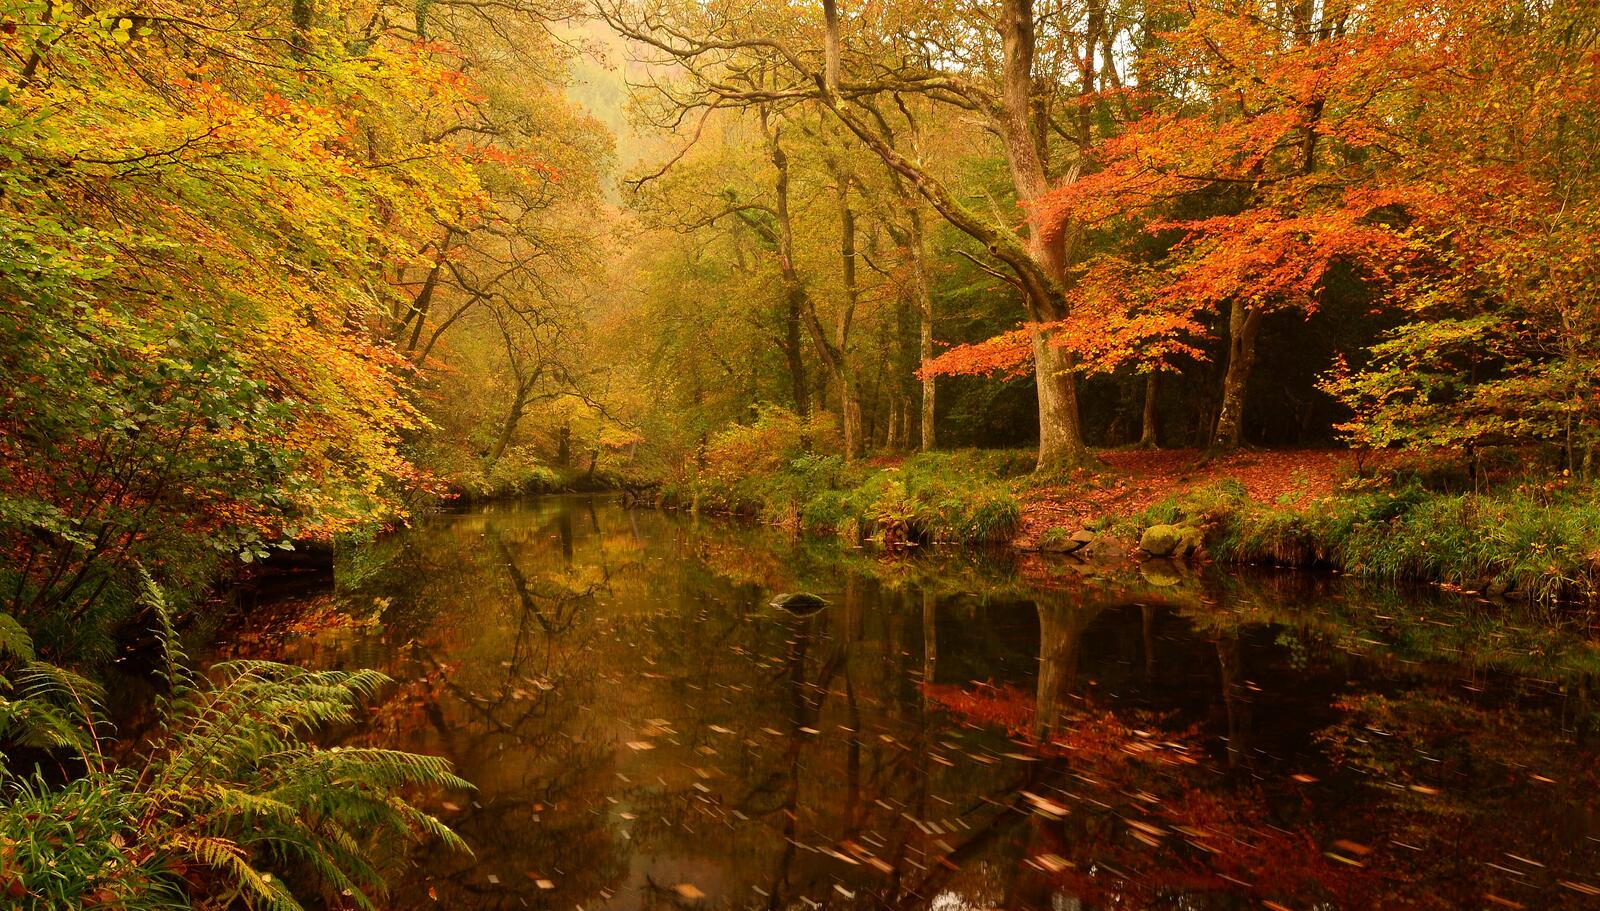 Wallpapers autumn landscapes river in the forest on the desktop